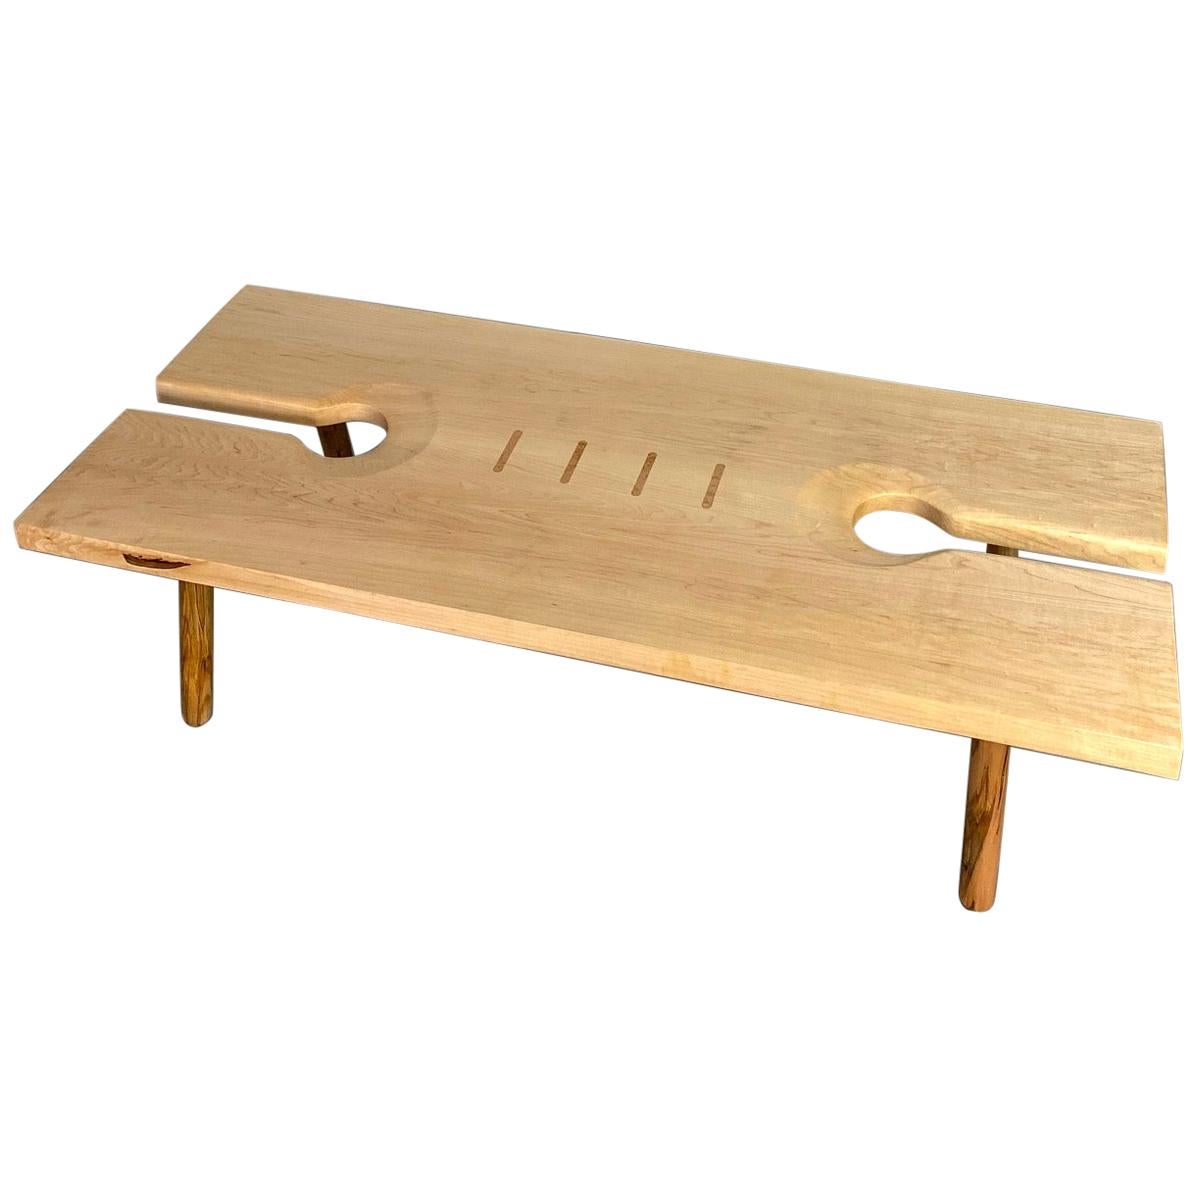 Studio Coffee Table by Michael Rozell US, 2020 For Sale